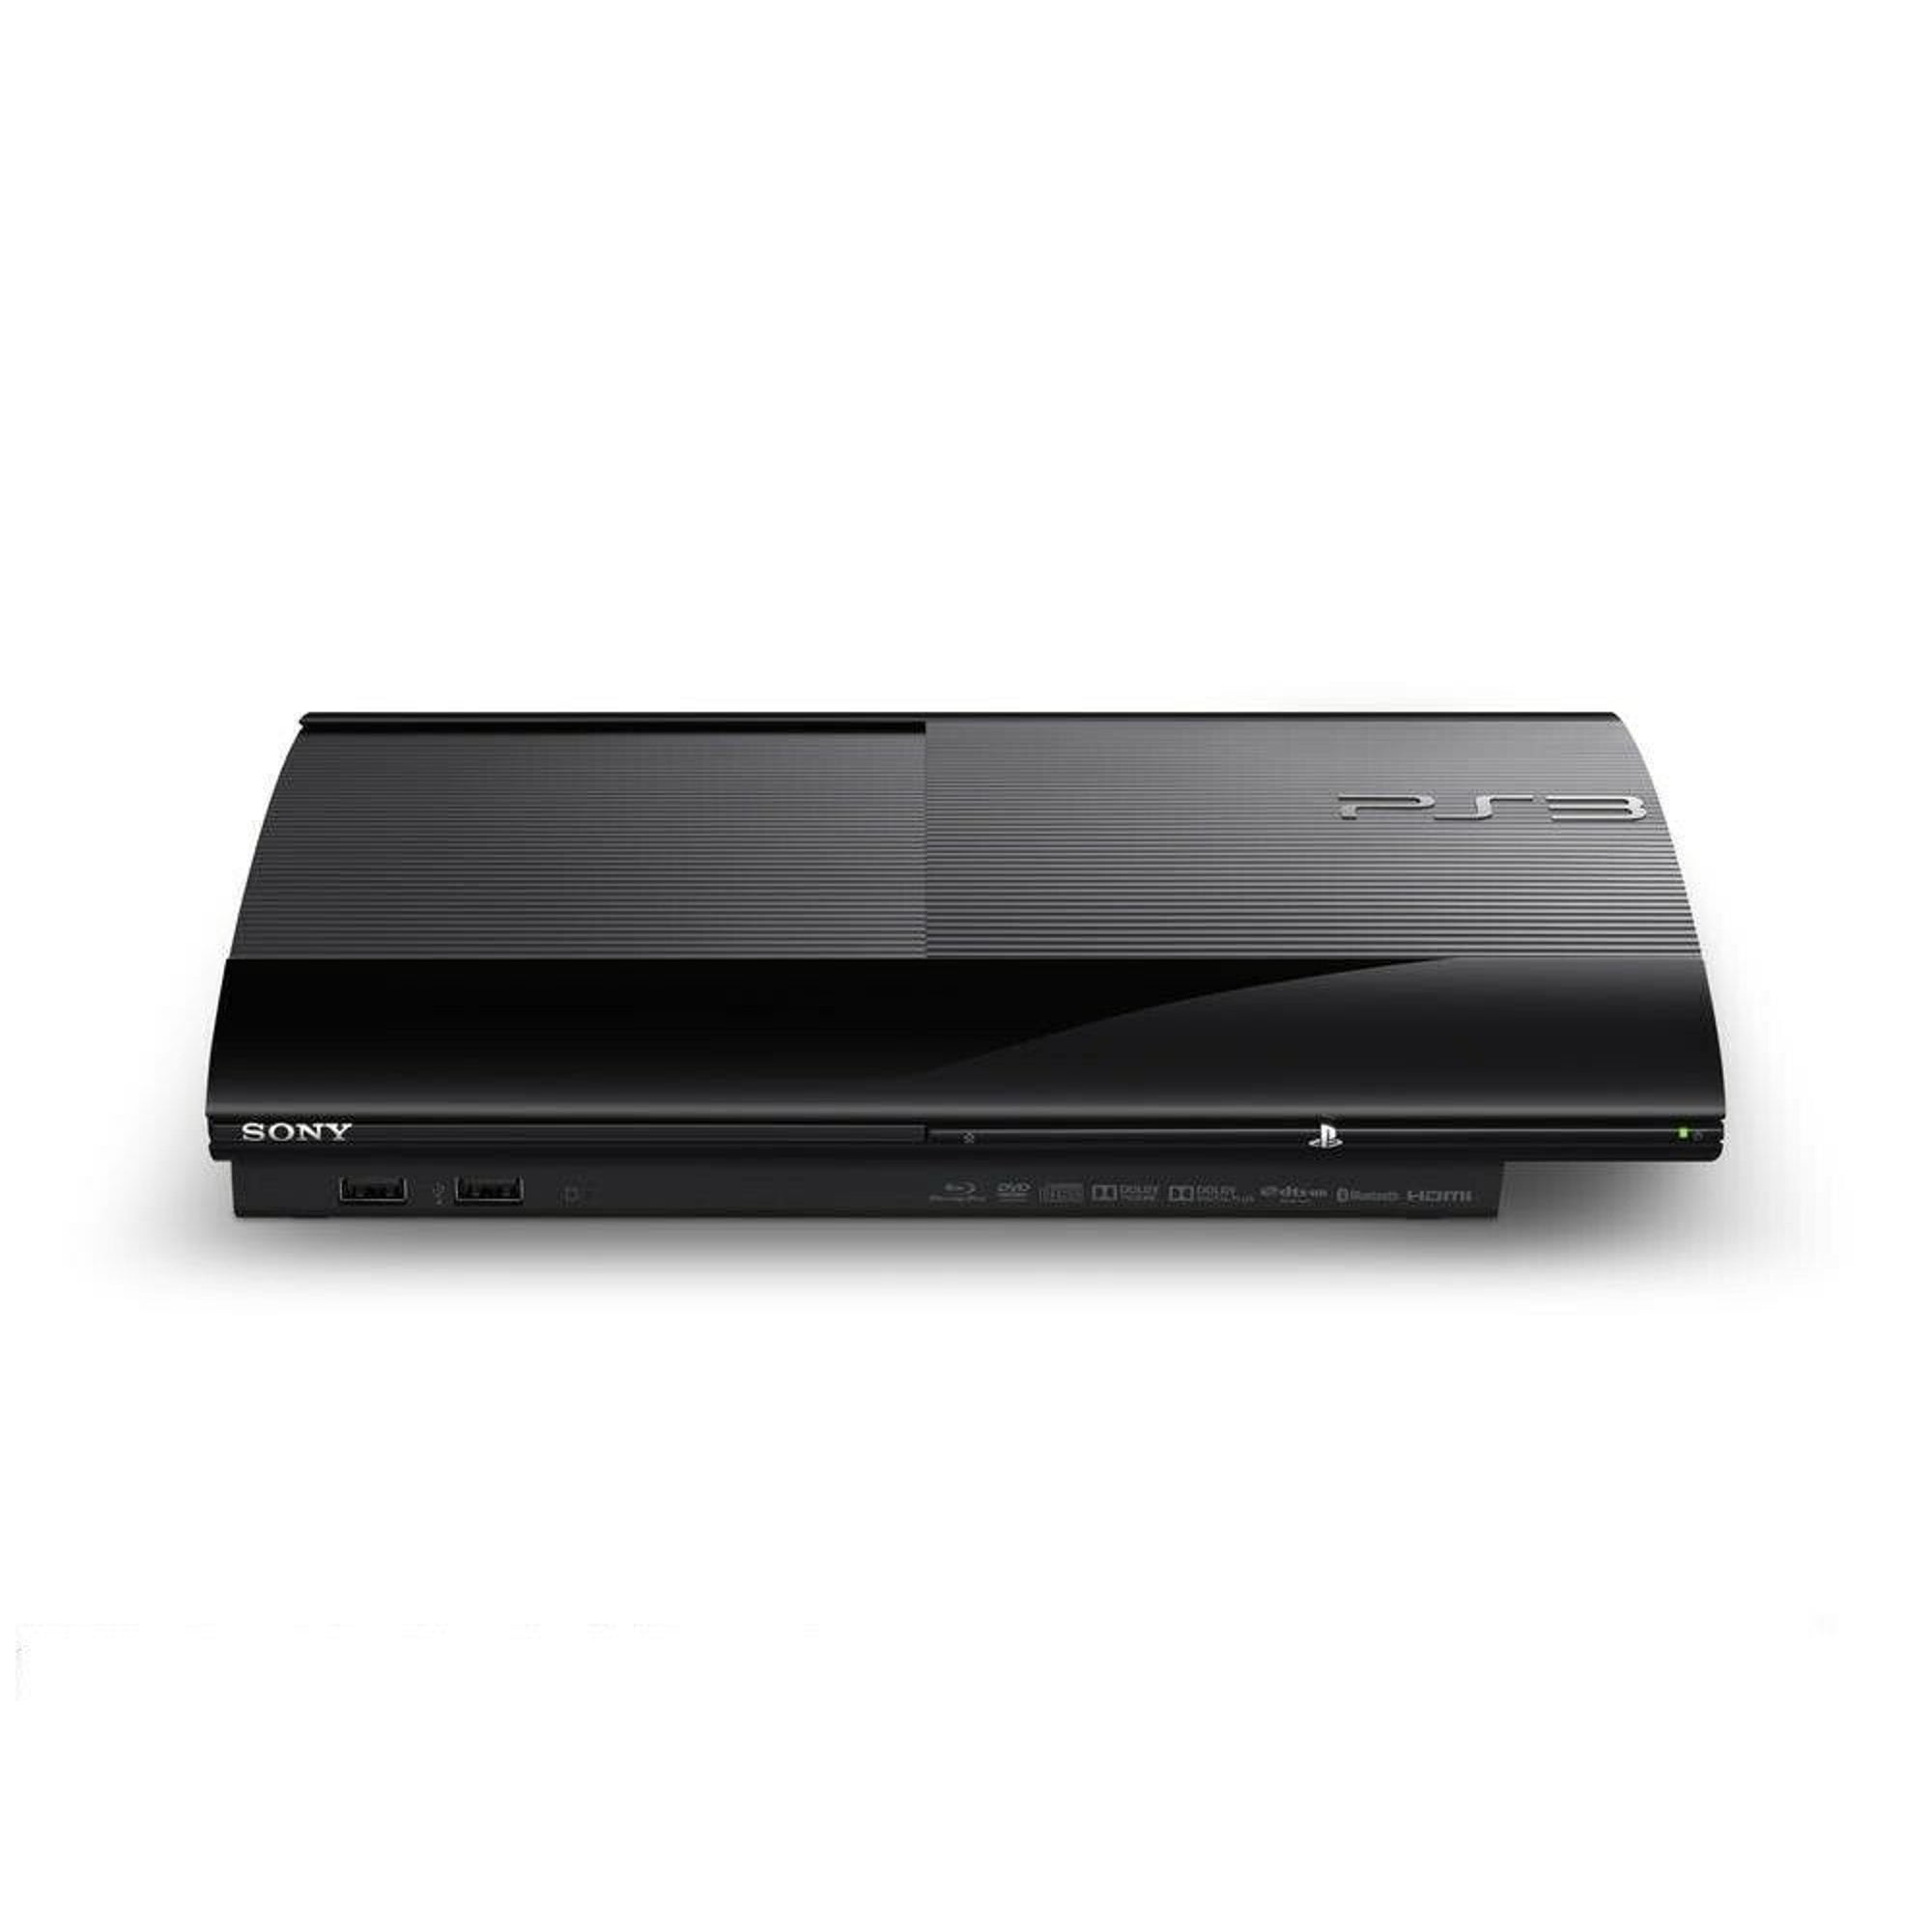 Restored Sony Playstation 3 PS3 Game System 12GB Core Super Slim PS3  Console Only - Black CECH-4301A (Refurbished)